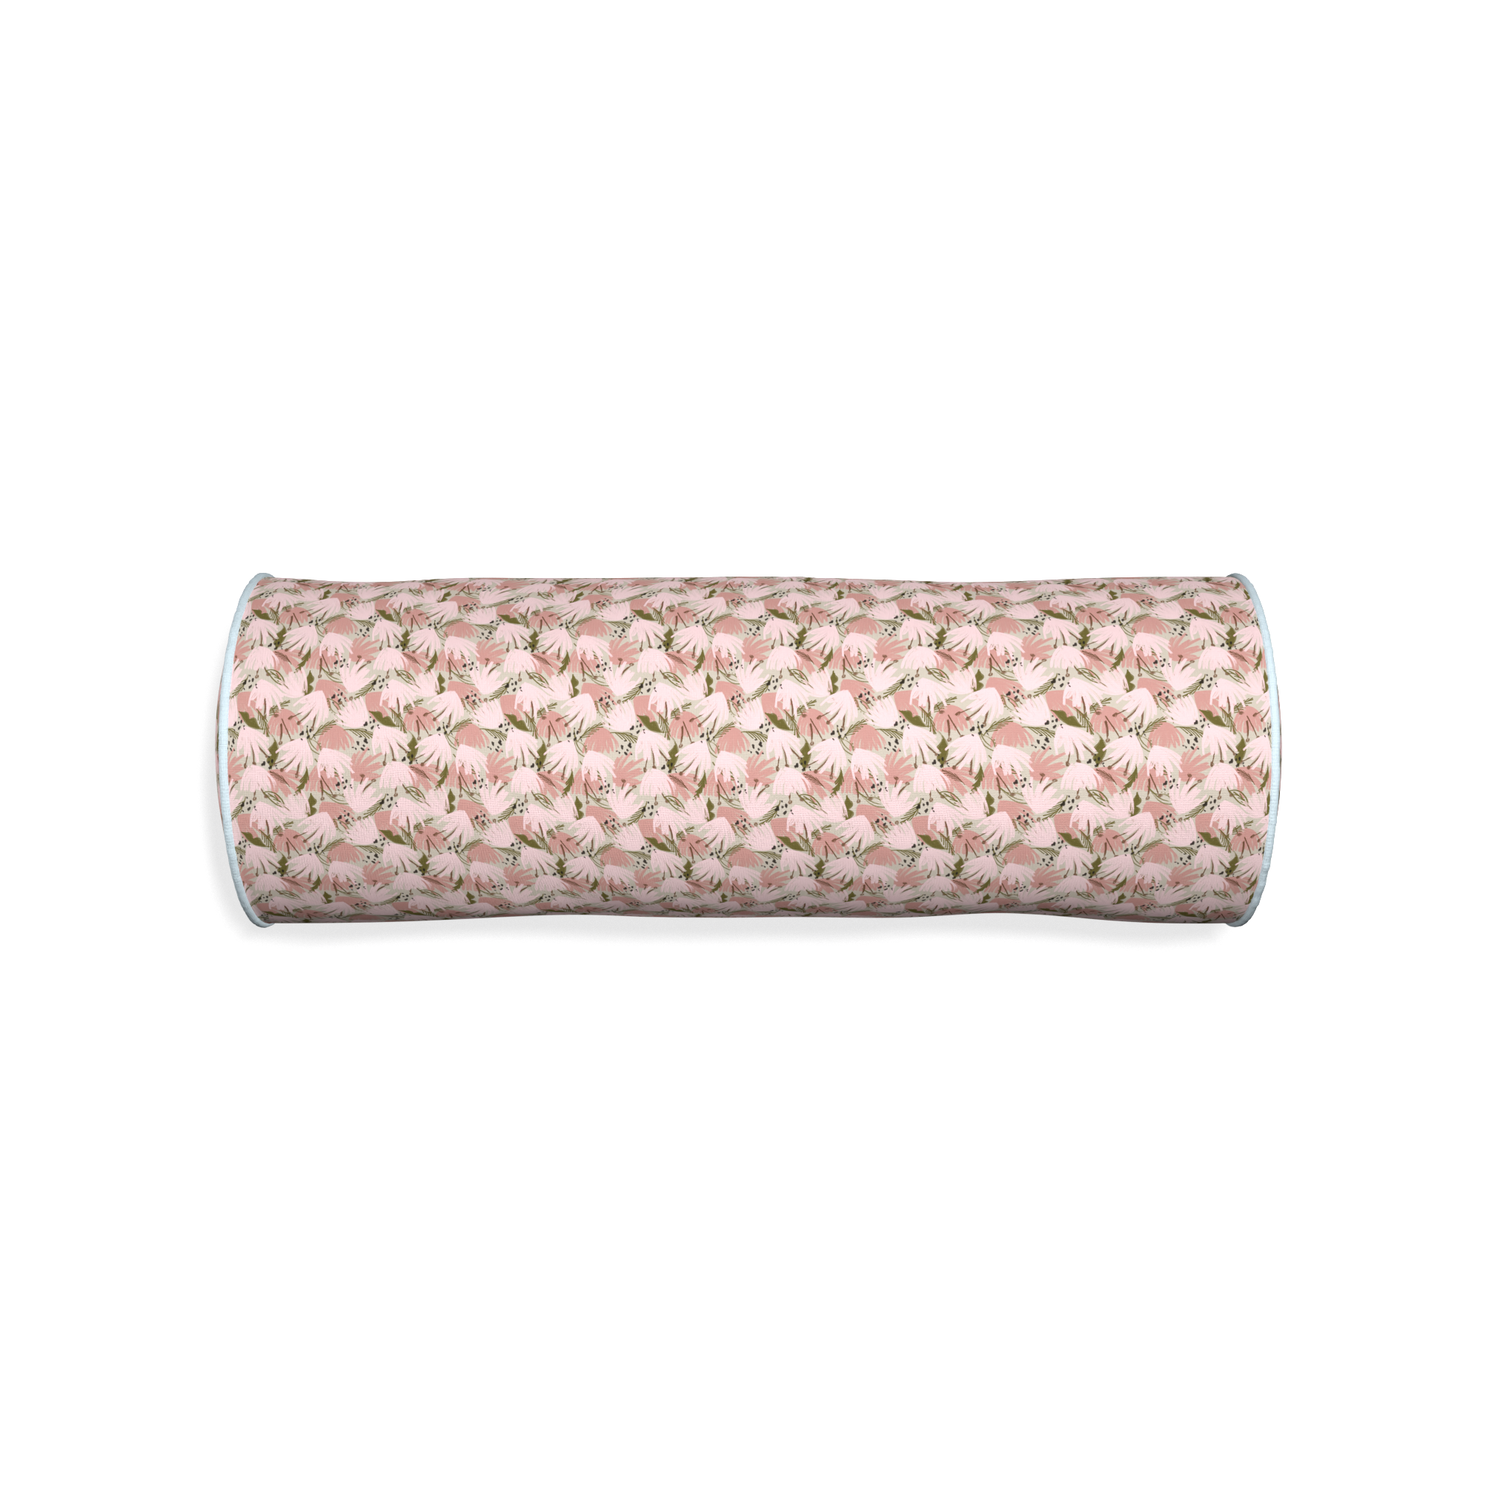 Bolster eden pink custom pillow with powder piping on white background